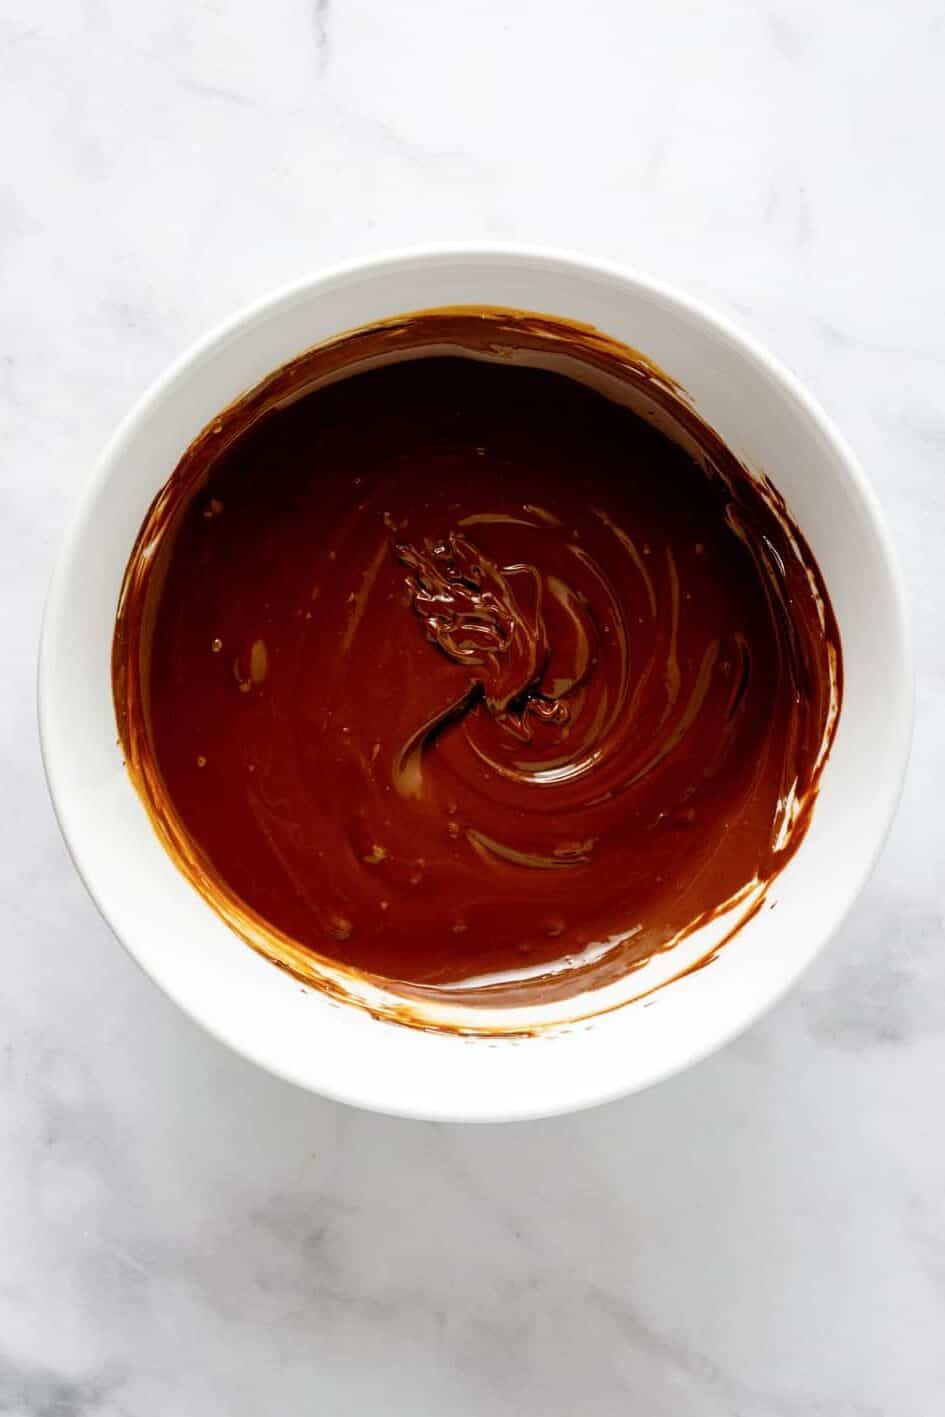 melted semi-chocolate in a white round bowl